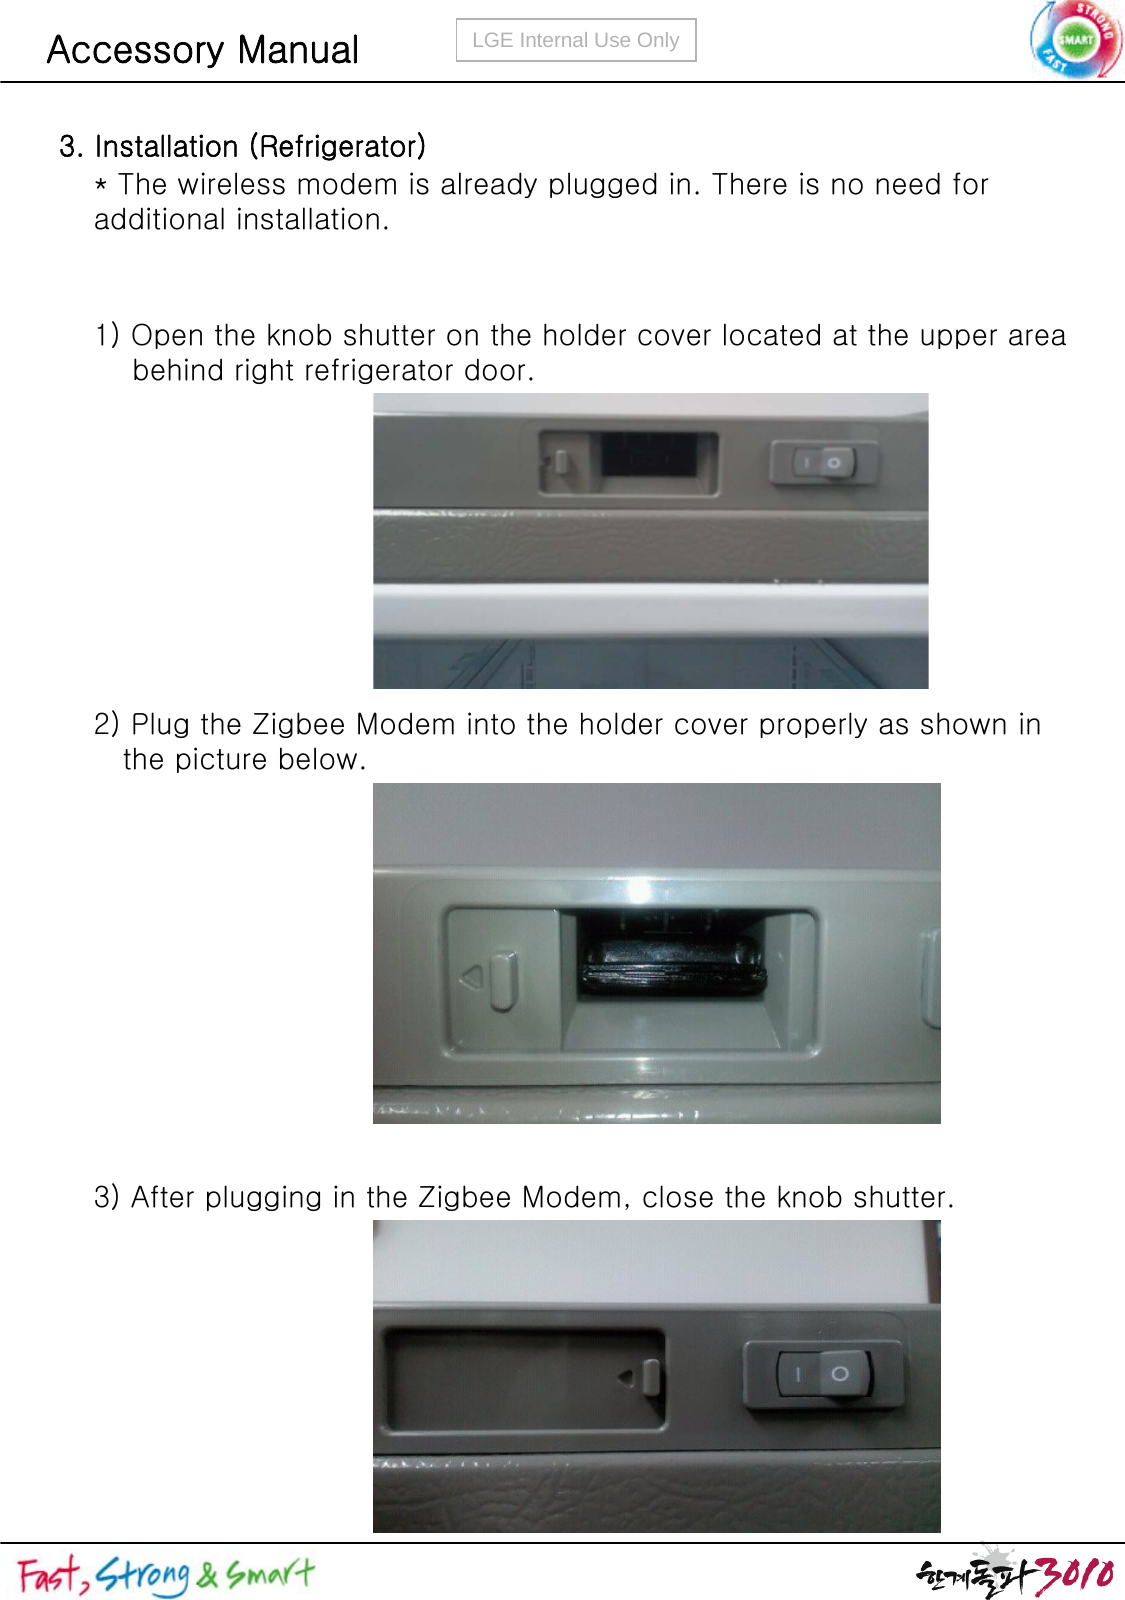 LGE Internal Use OnlyAccessory Manual1) Open the knob shutter on the holder cover located at the upper area behind right refrigerator door.2) Plug the Zigbee Modem into the holder cover properly as shown in the picture below.3) After plugging in the Zigbee Modem, close the knob shutter.* The wireless modem is already plugged in. There is no need foradditional installation.3. Installation (Refrigerator)